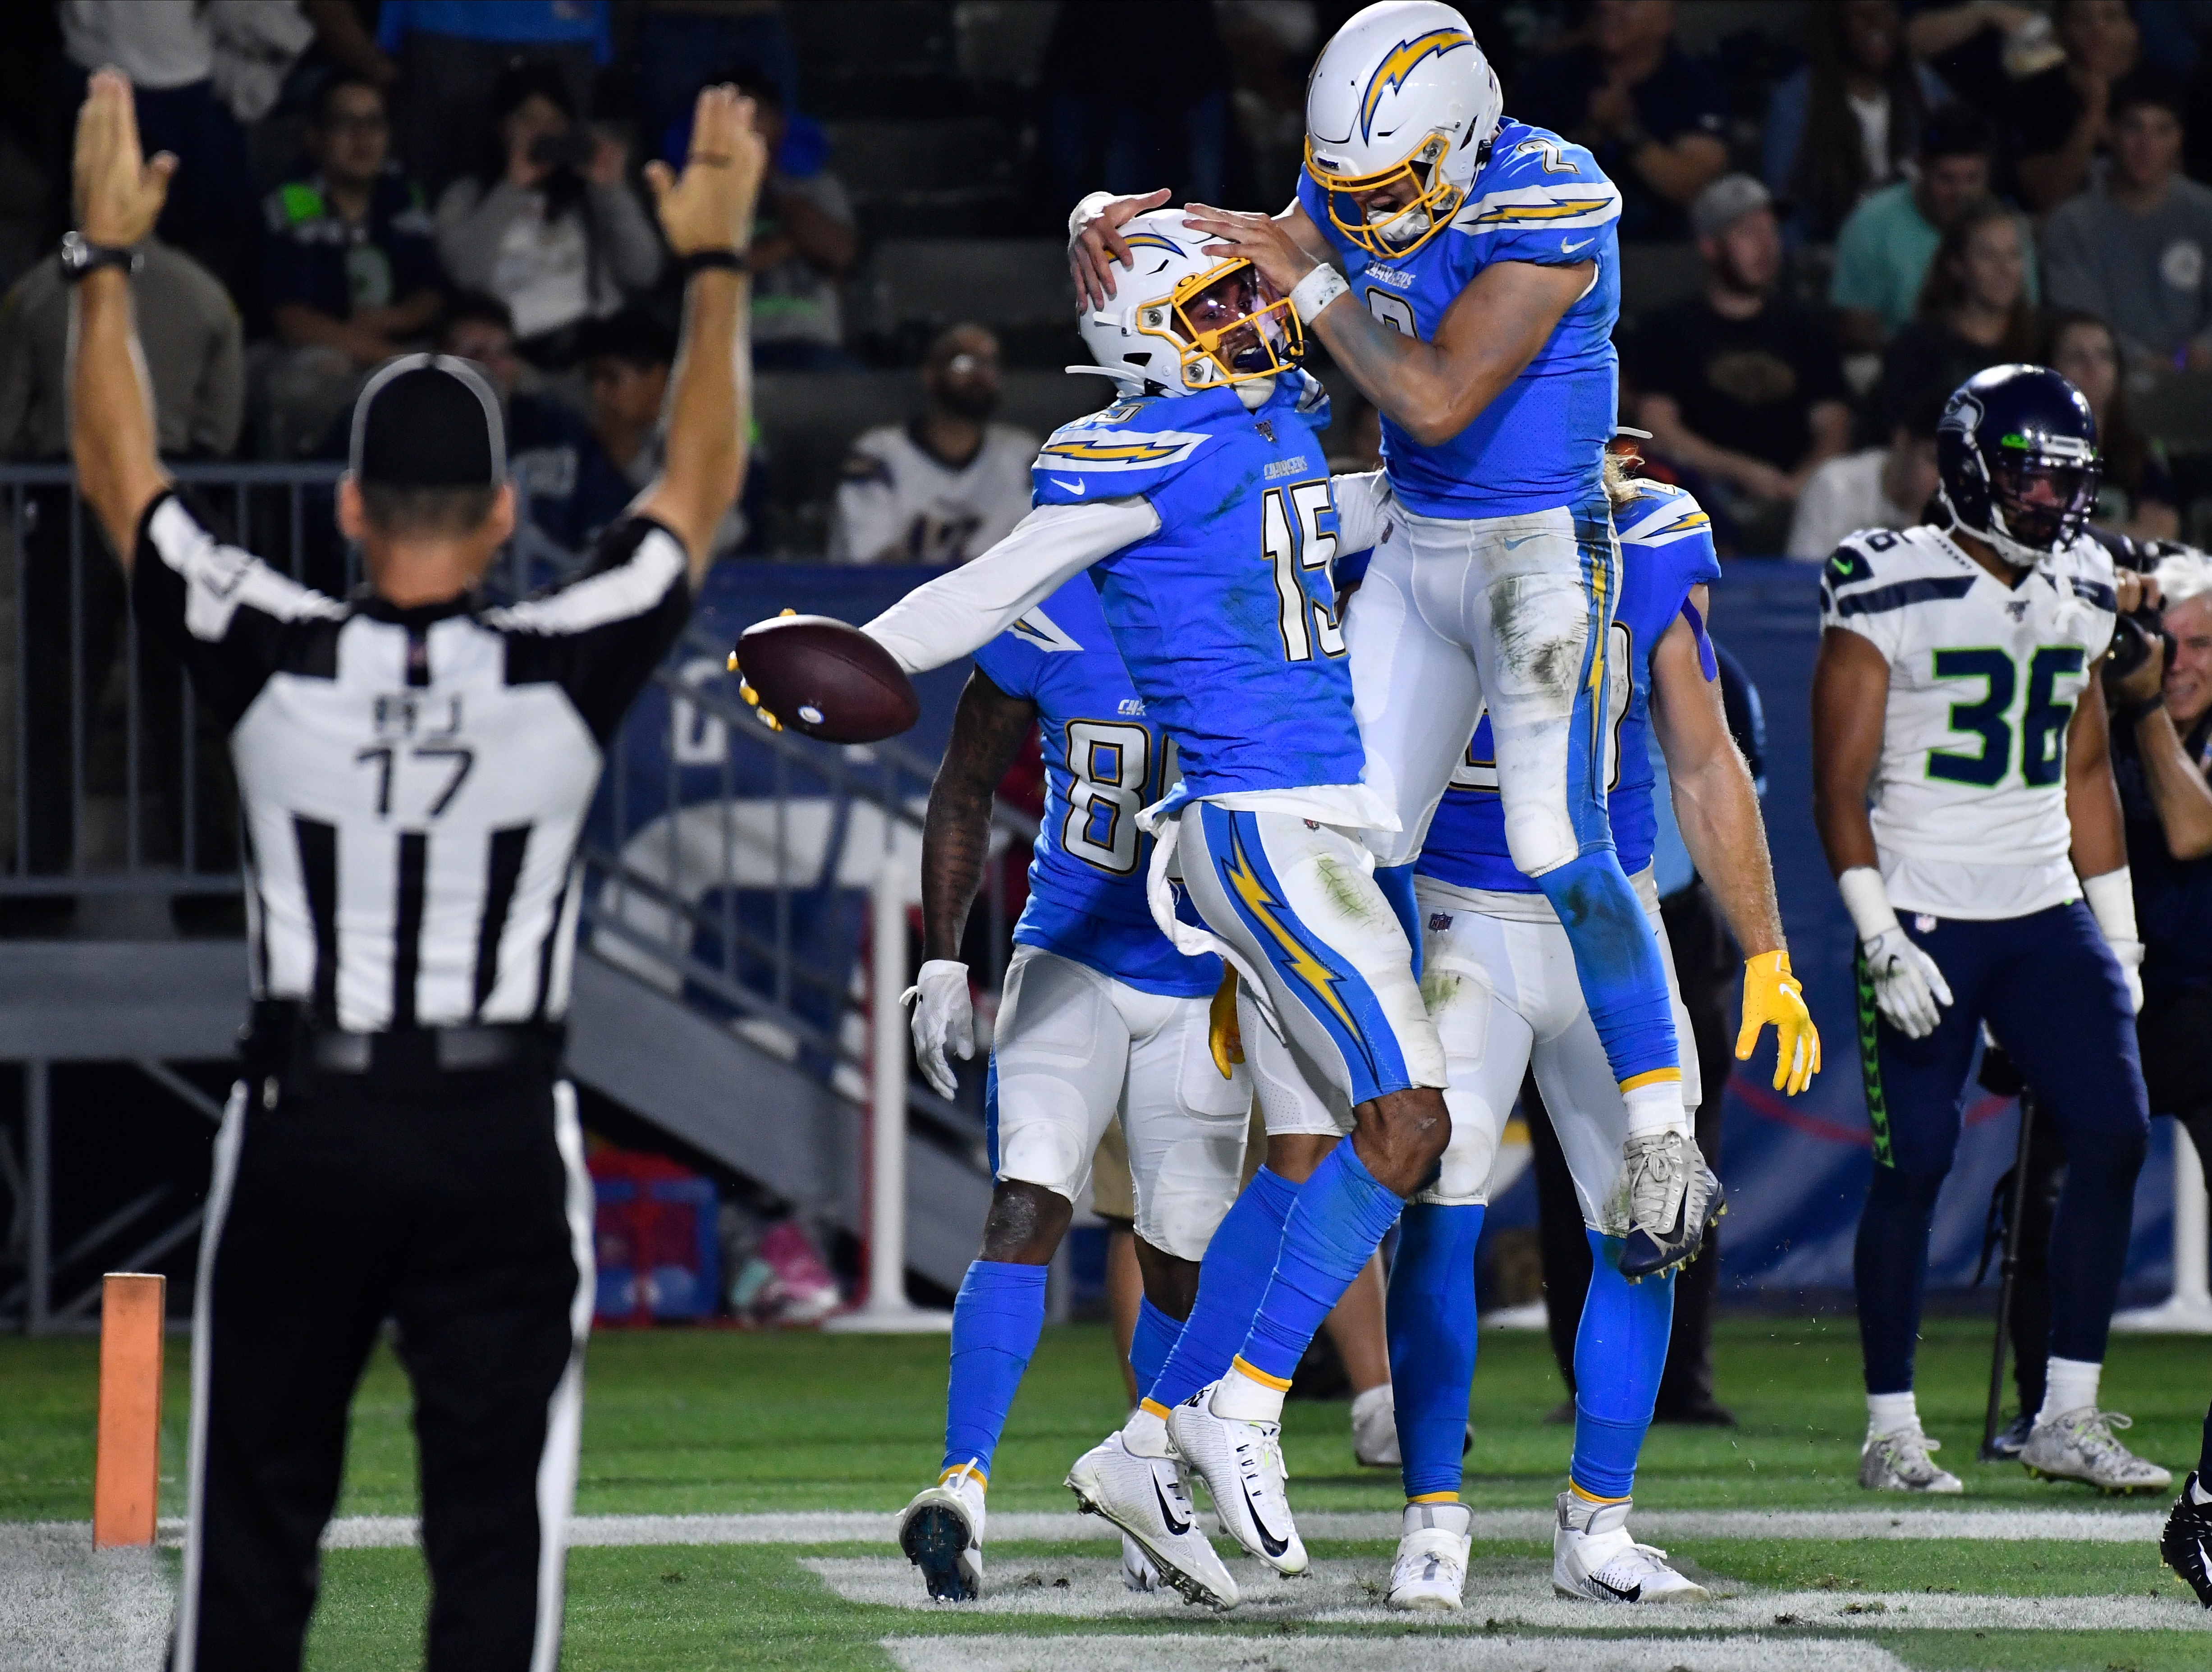 Best photos from Los Angeles Chargers’ preseason matchup vs. Seahawks